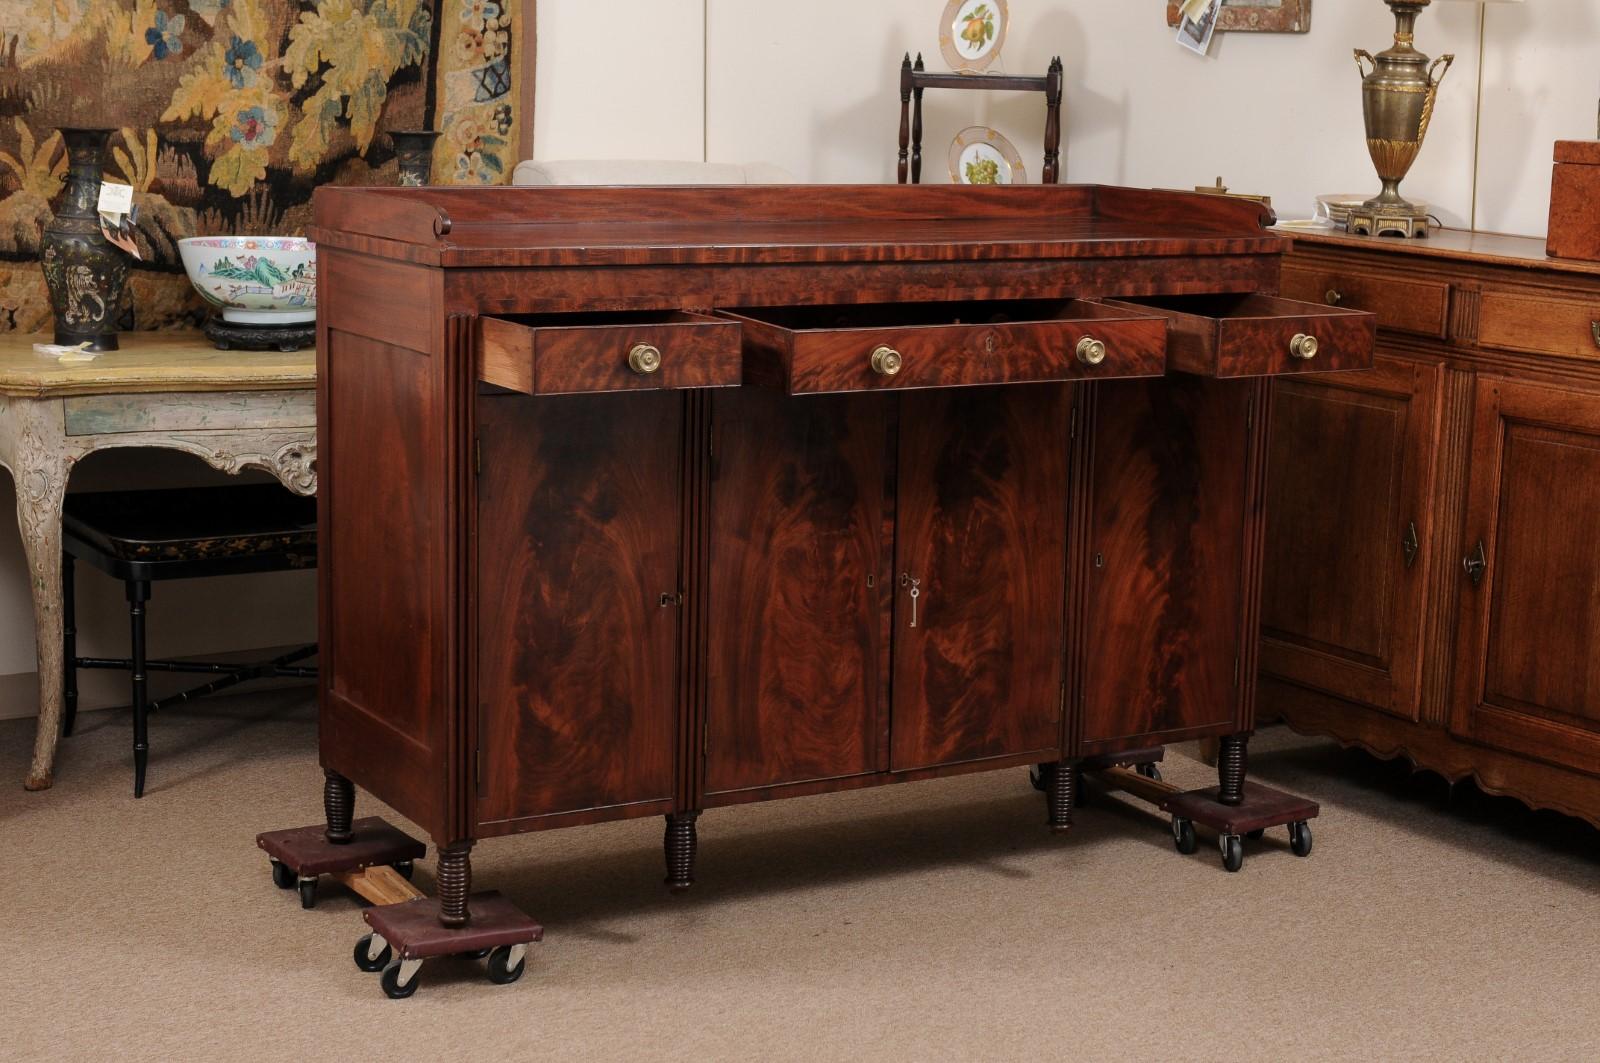 19th Century American Sheraton Sideboard in Mahogany with 4 Cabinet Doors 14